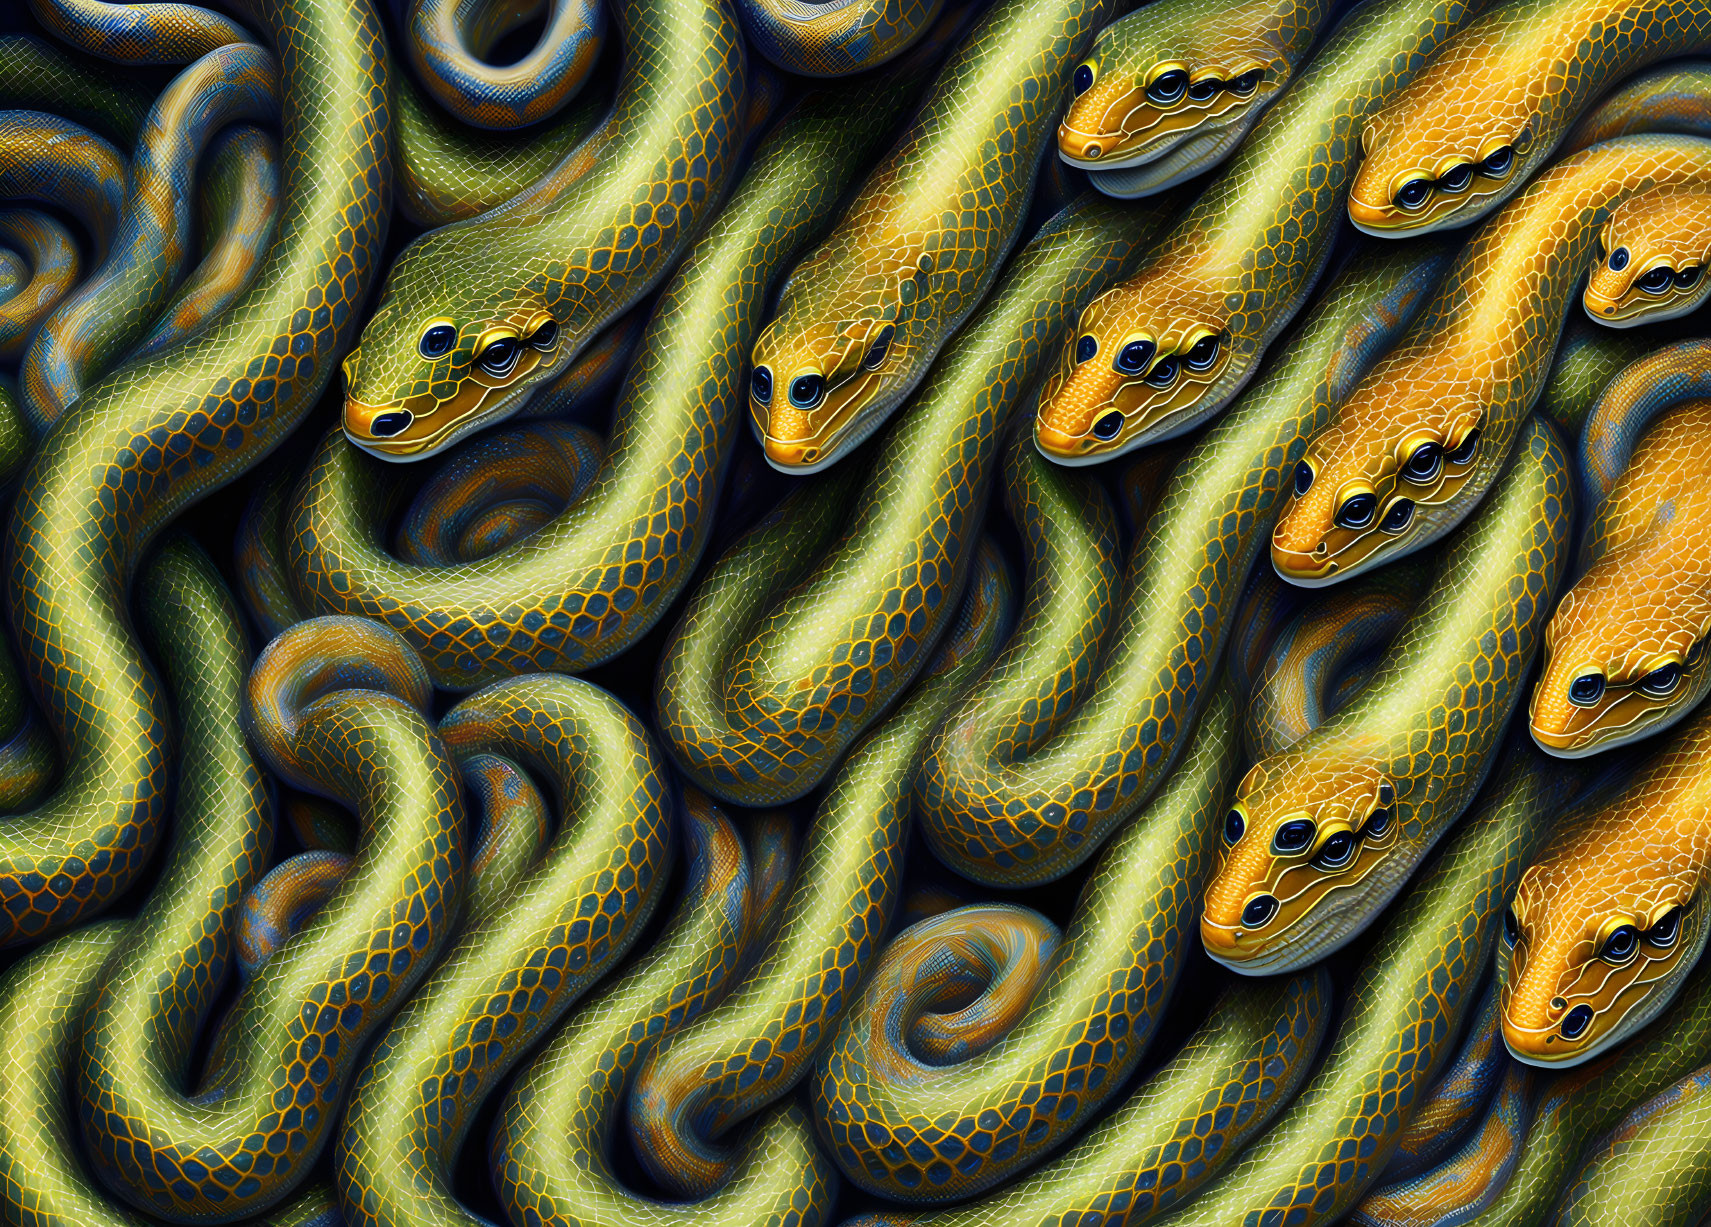 Vibrant golden snakes with intricate scale patterns intertwined